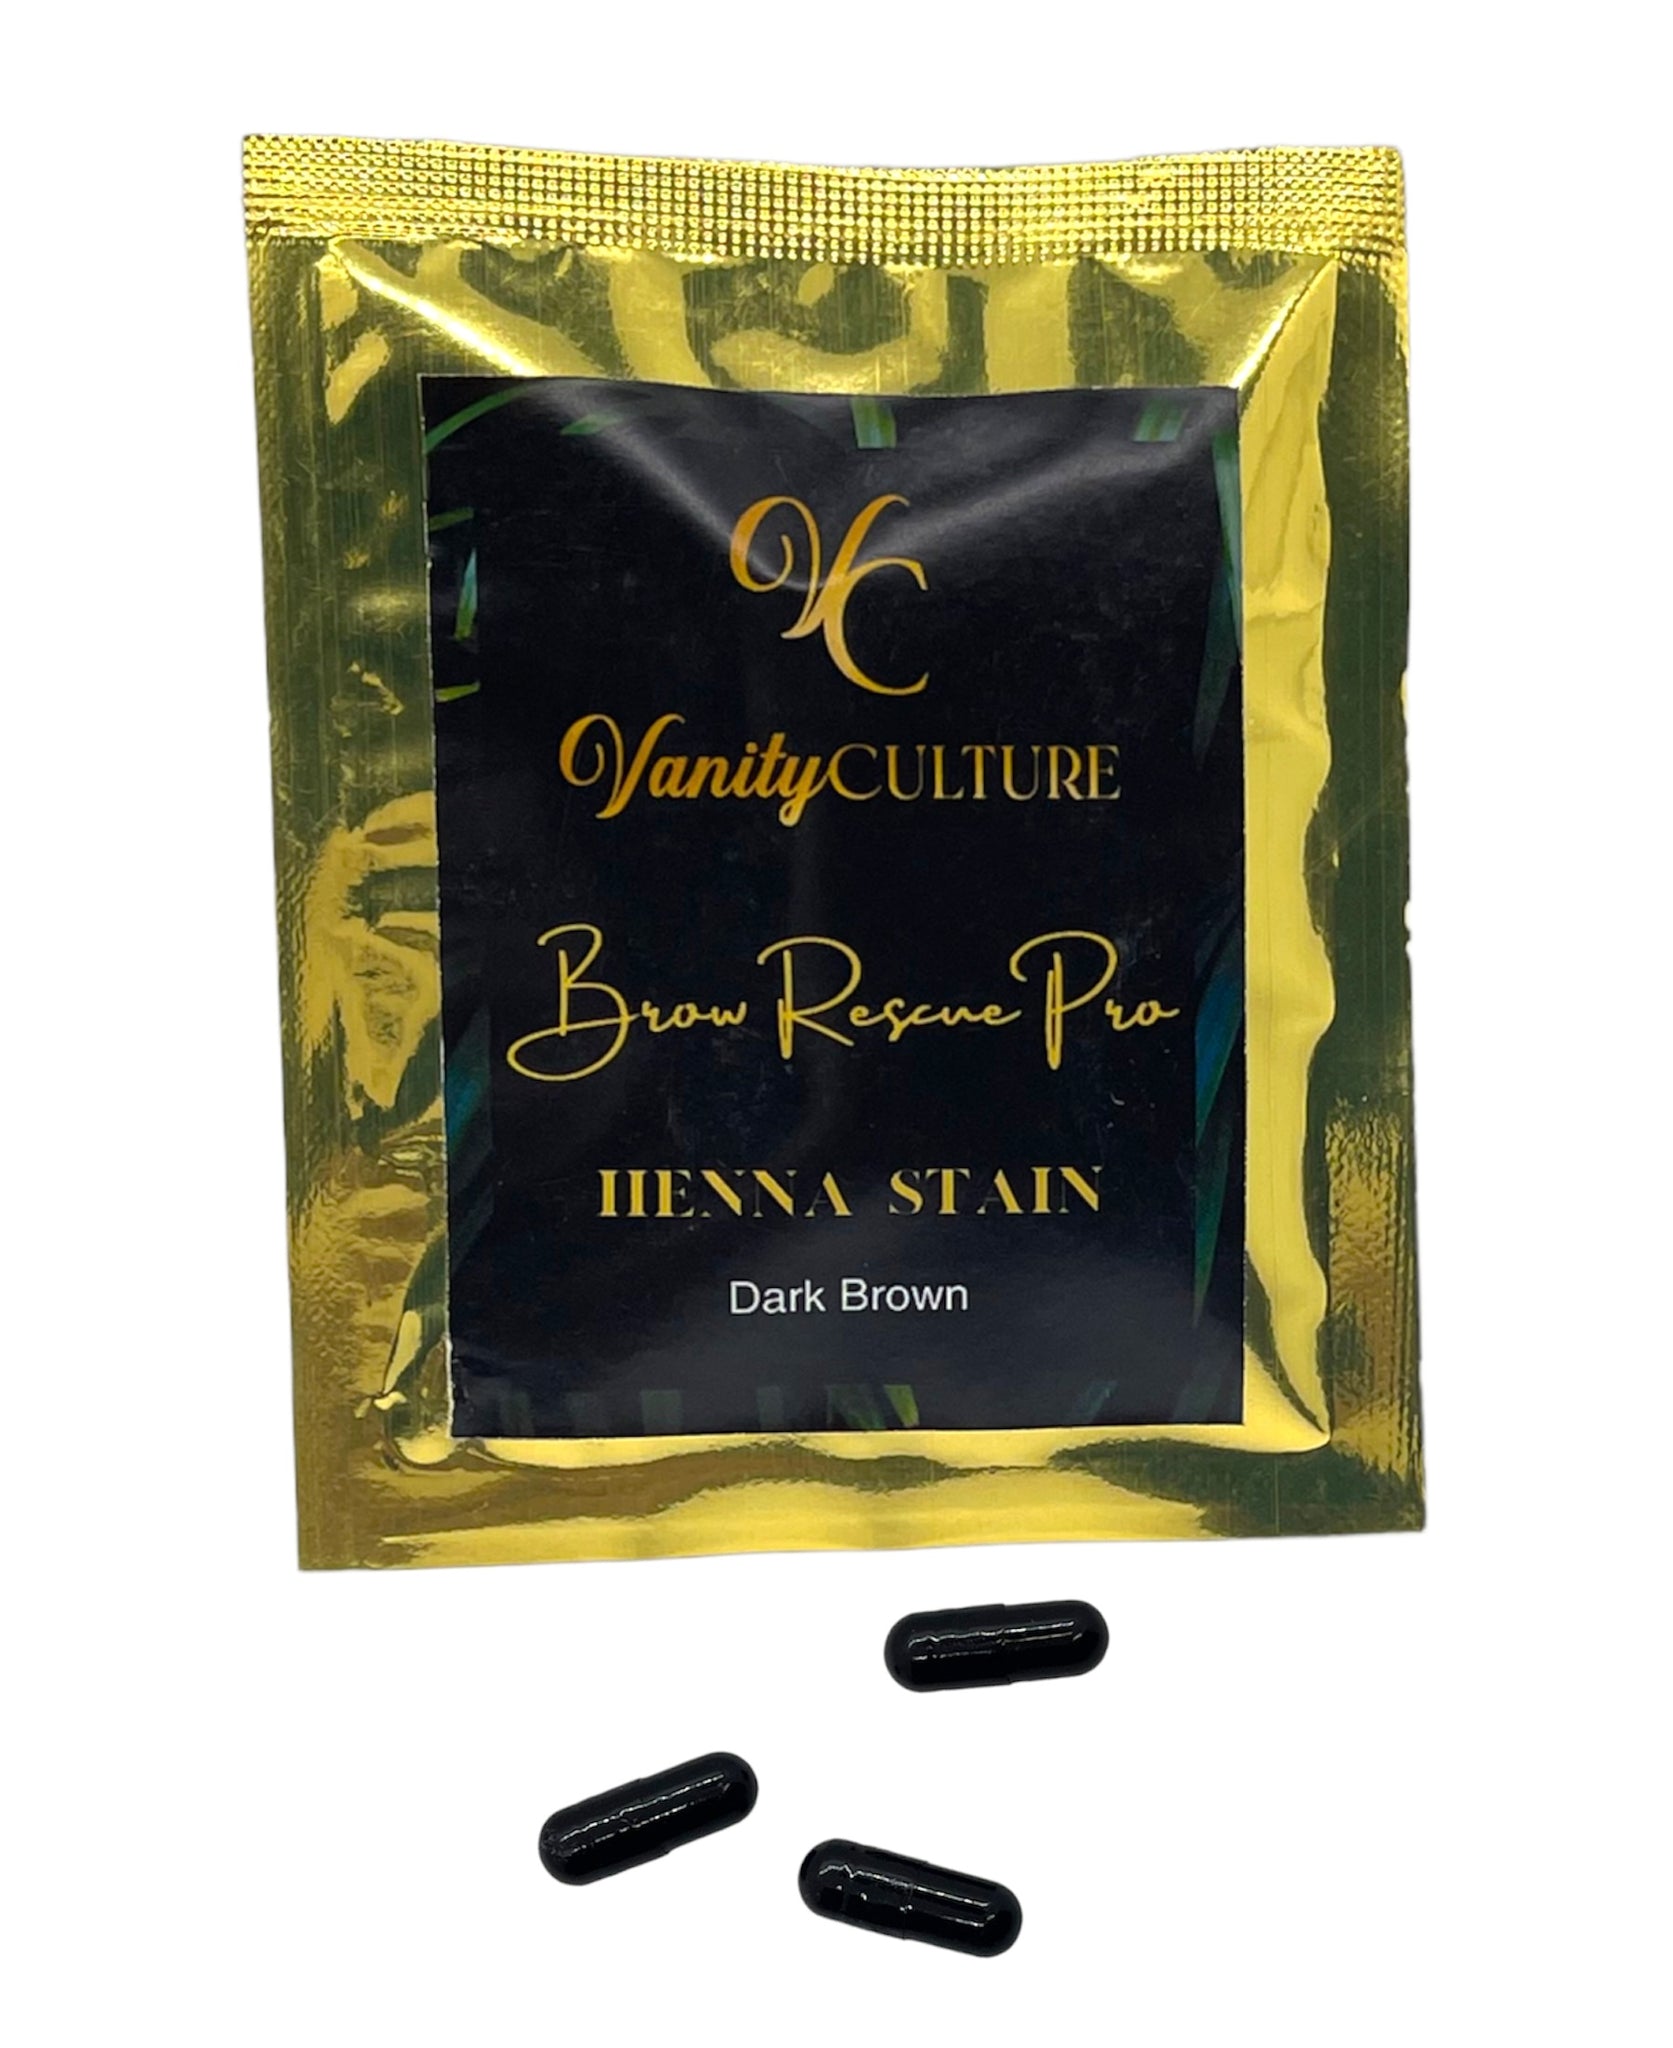 Brow Rescue Pro - Henna Stain